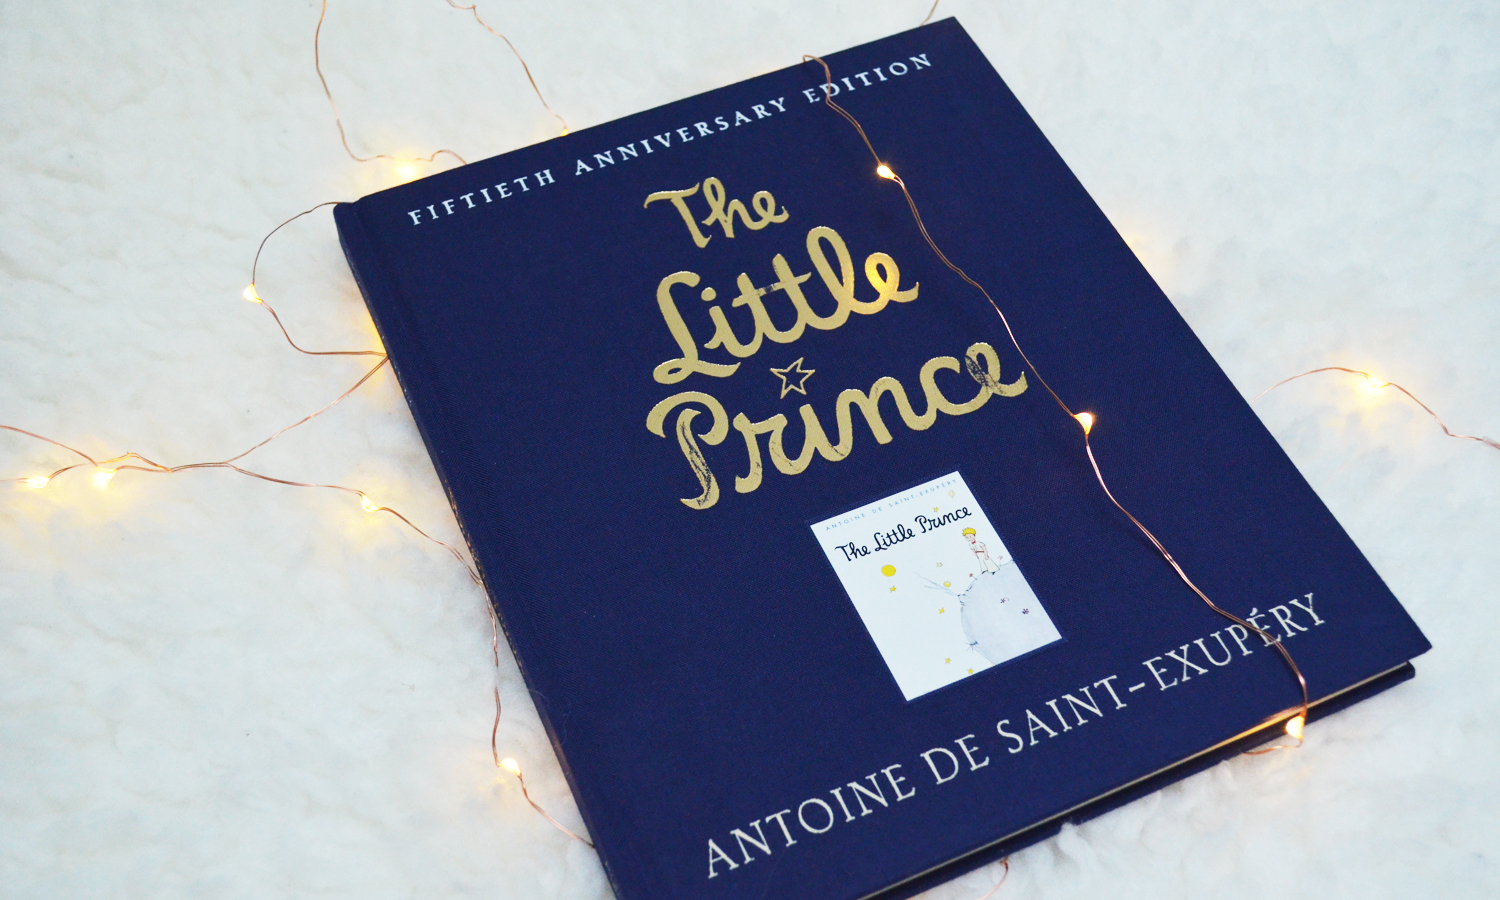 The Little Prince and more of the best High School books...plus 2 that should be cut from the curriculum (in our opinion.)